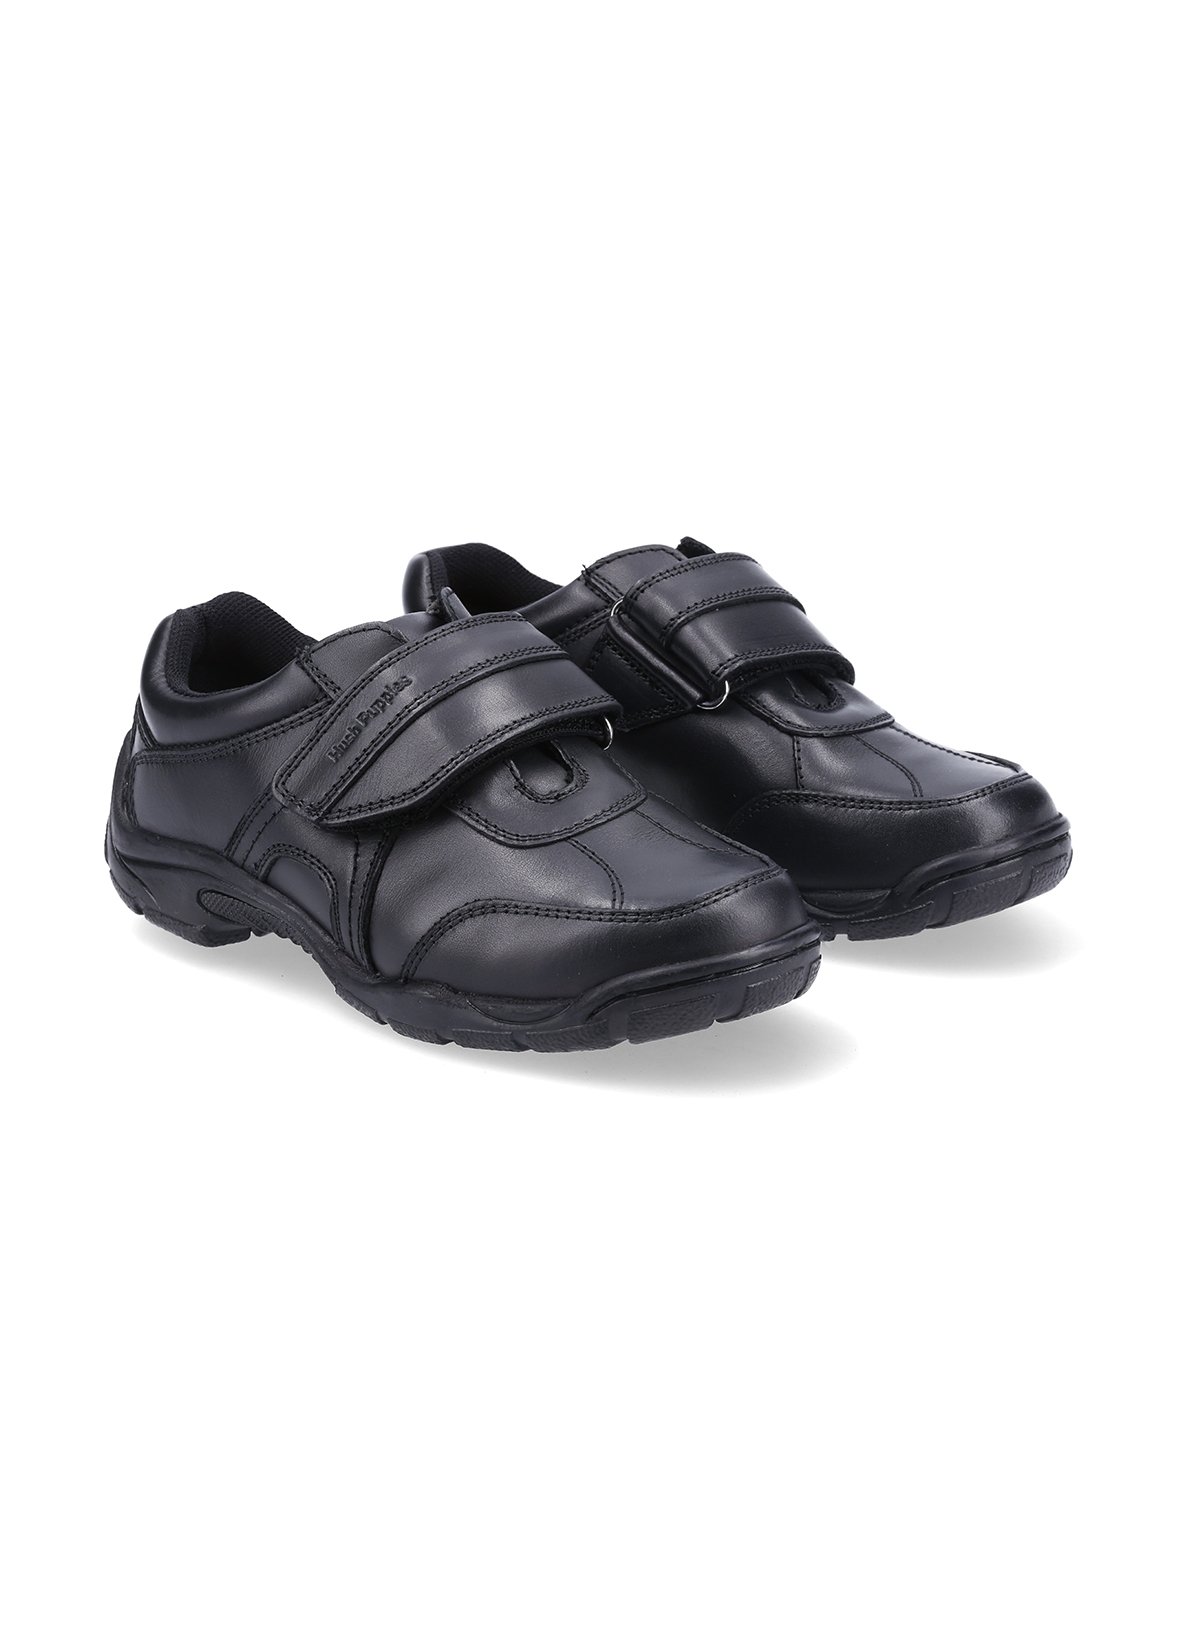 argos cycling shoes